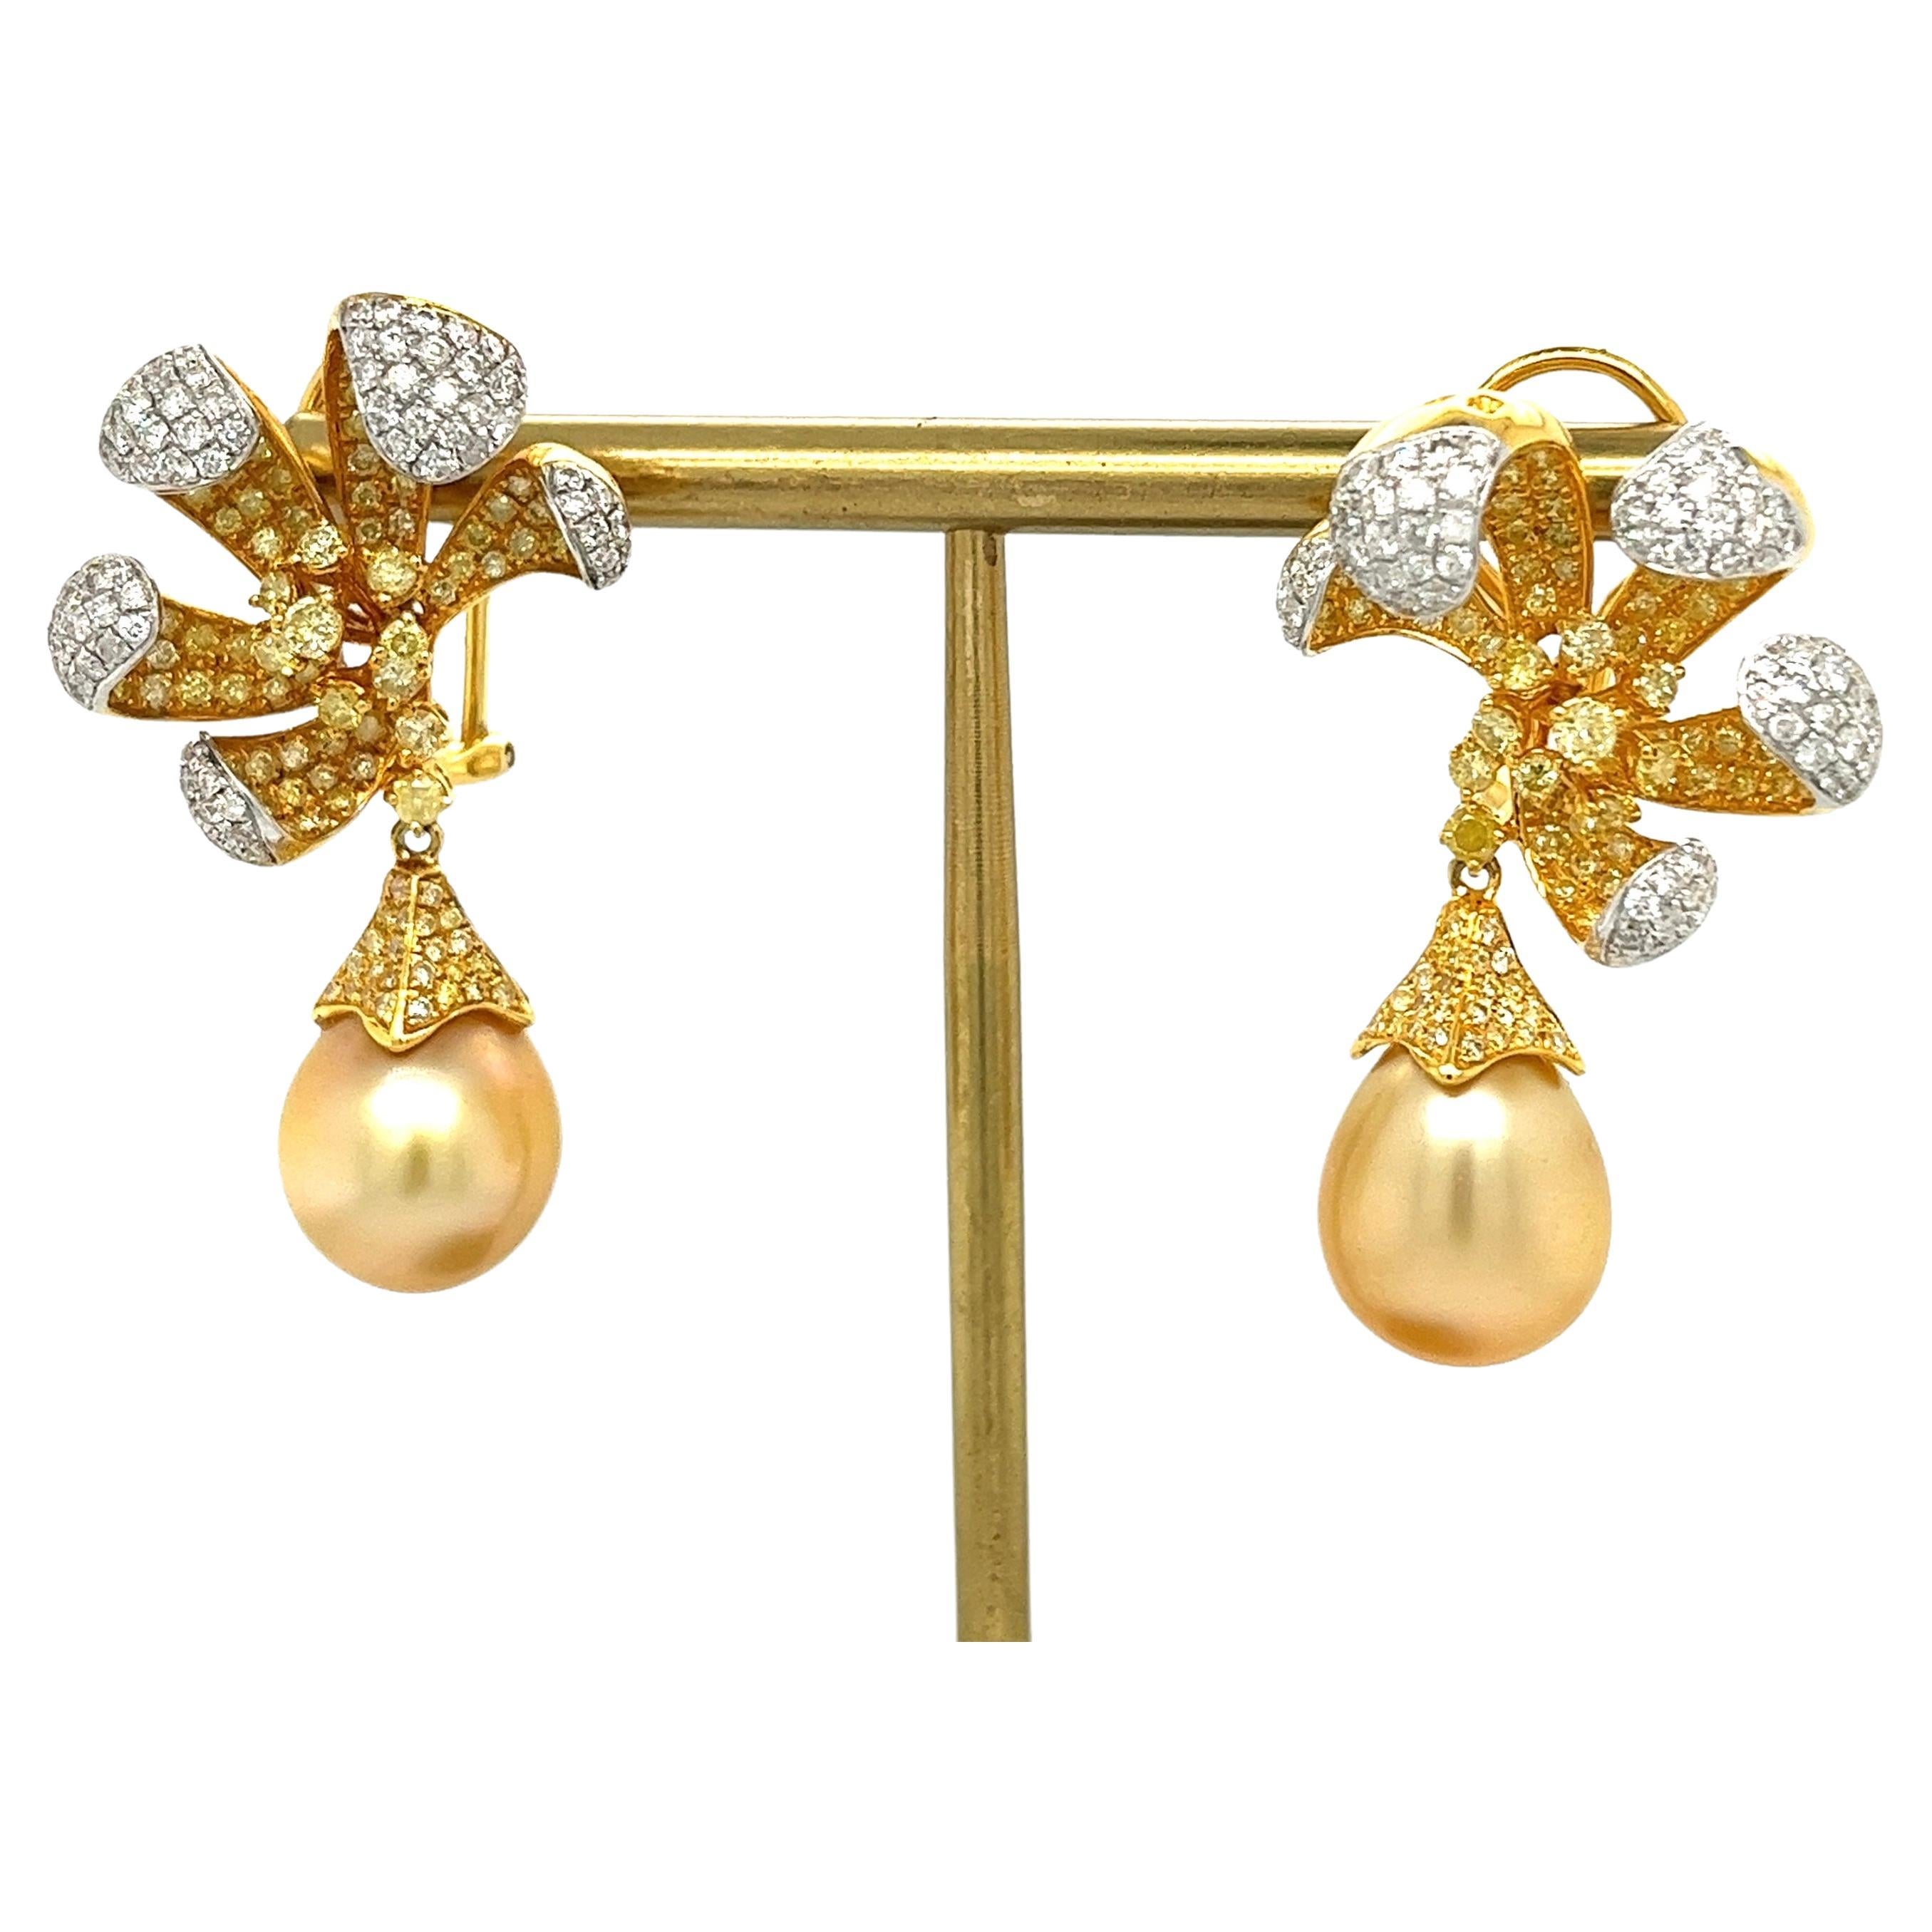 18K Yellow Gold Pearl Earrings with Diamonds

2 Golden Pearls 12-13mm
258 Fancy Diamonds - 3.19 CT
160 Diamonds - 1.66 CT
18K White Gold - 20.53 GM

Adorn yourself in the epitome of luxury with our 18K Yellow Gold Pearl Earrings with Diamonds.